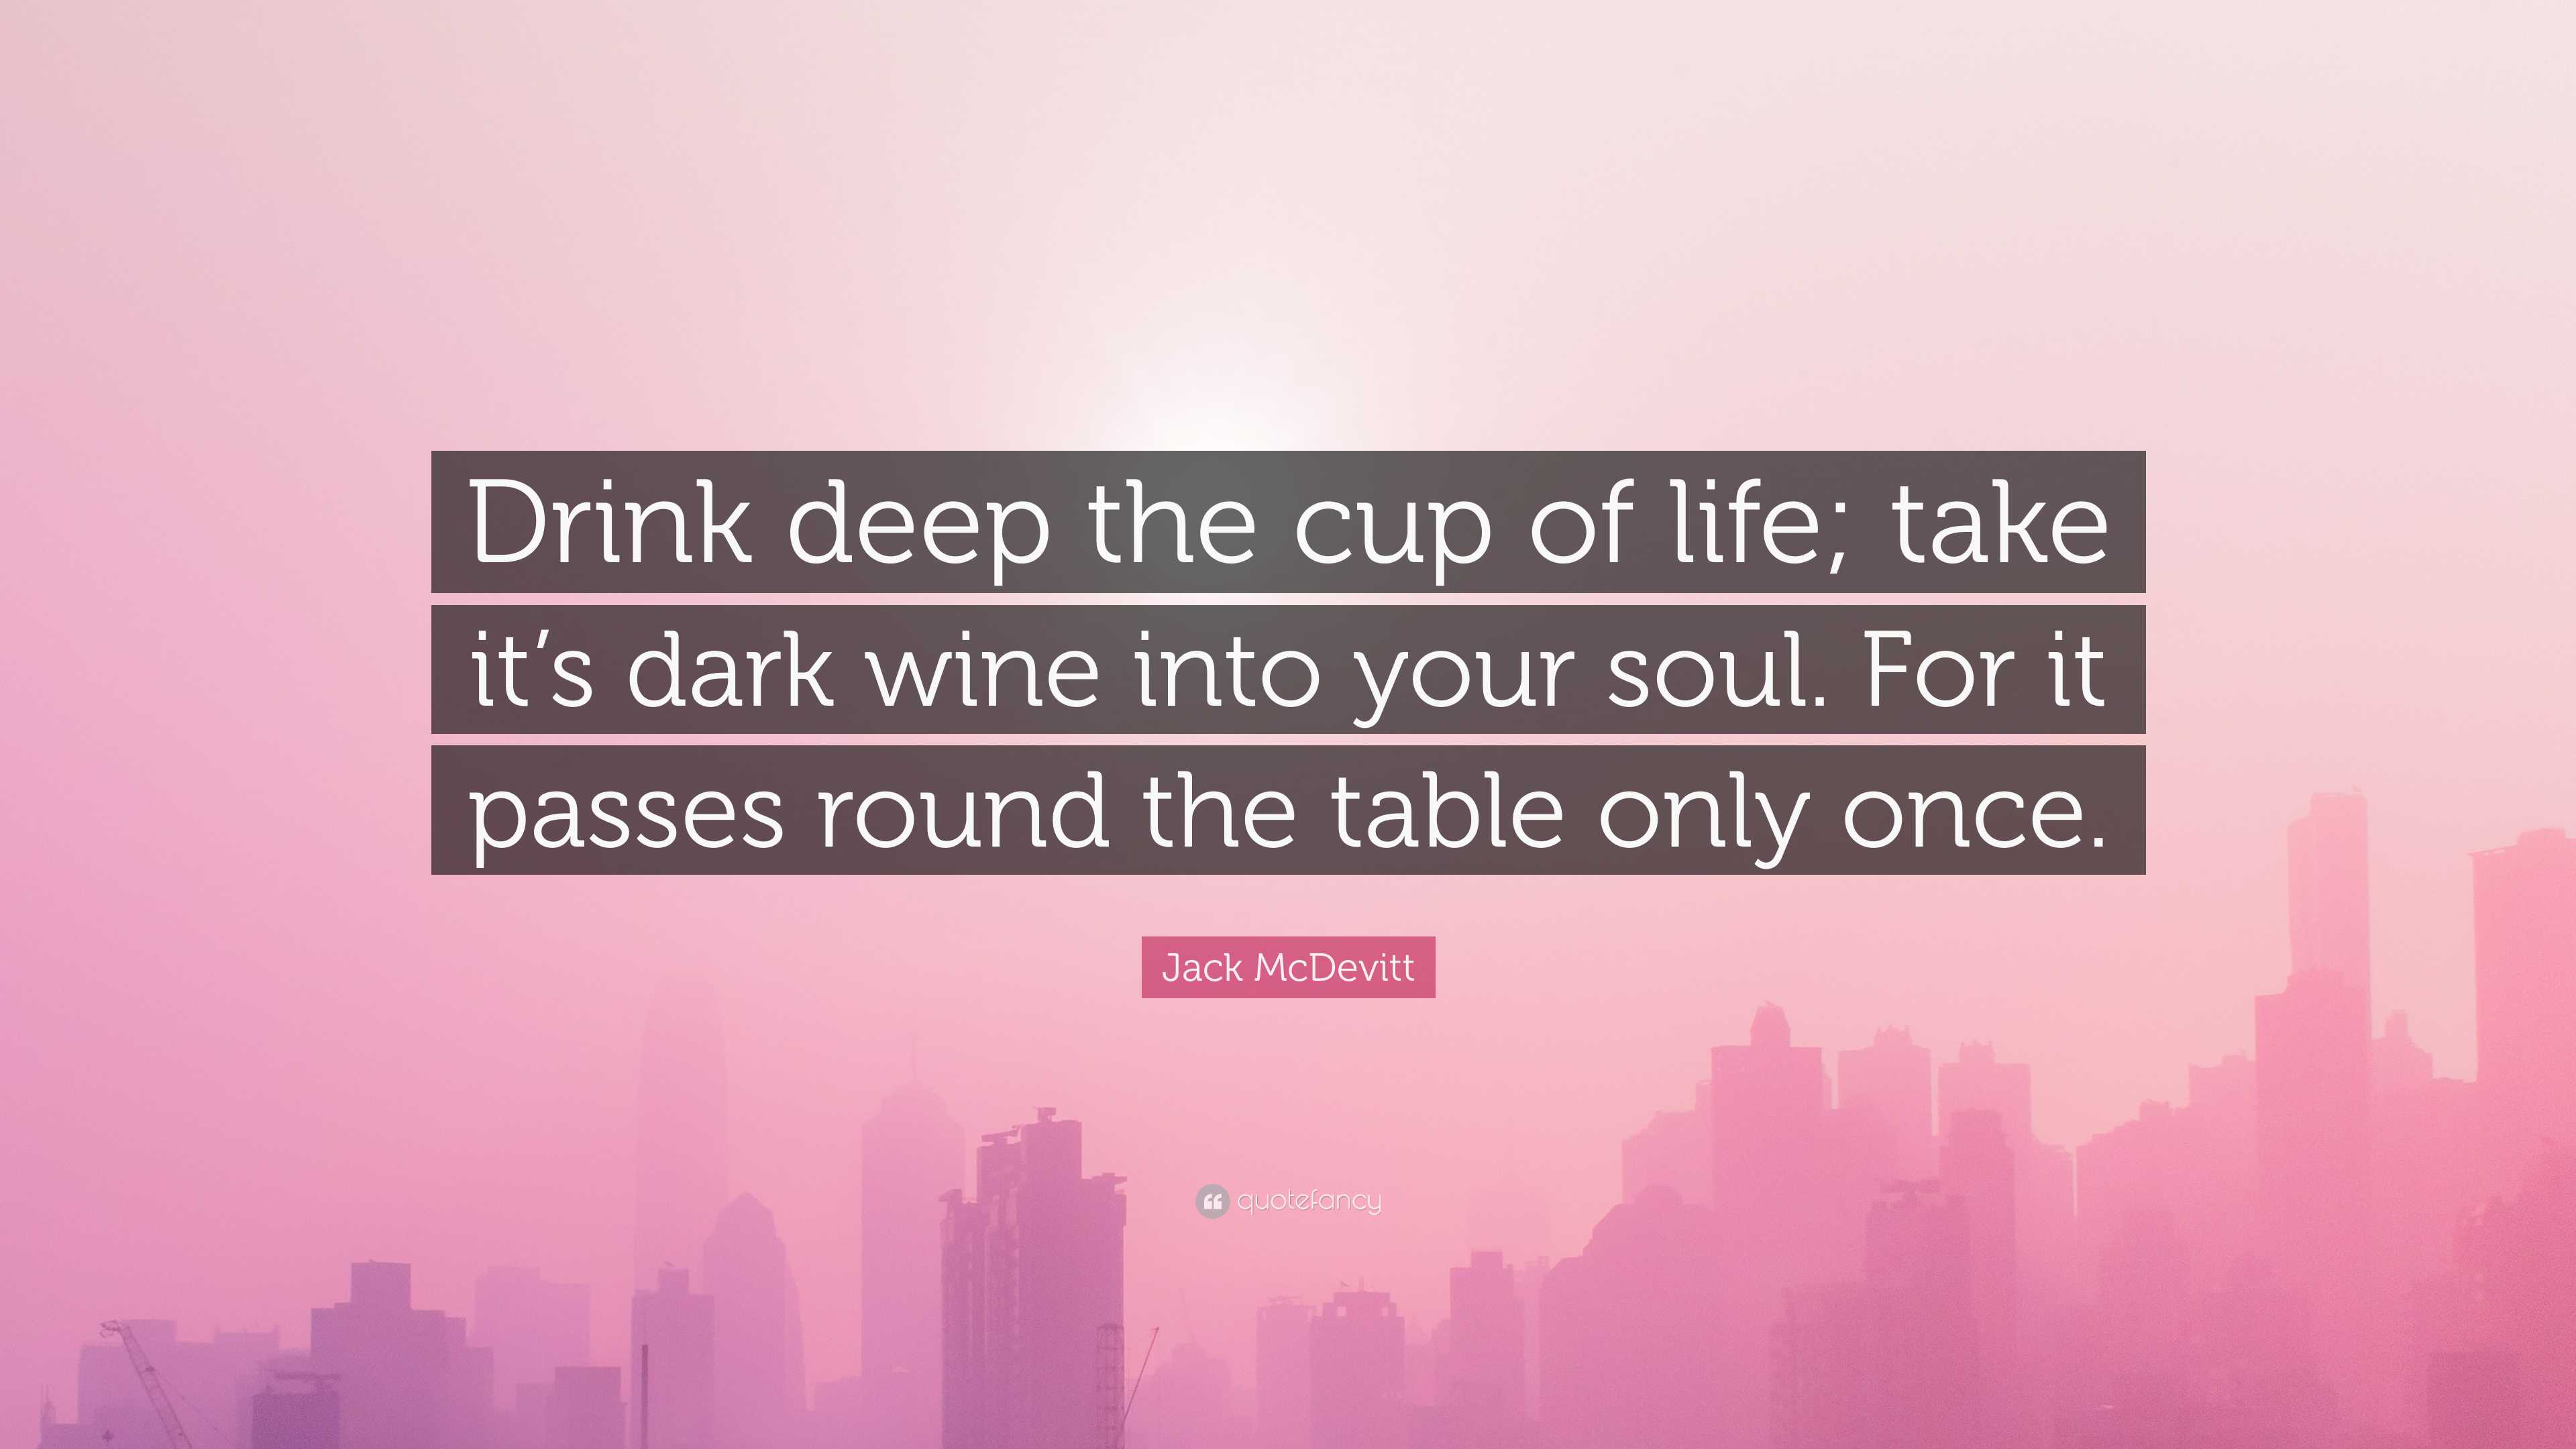 Jack McDevitt Quote: “Drink deep the cup of life; take it's dark